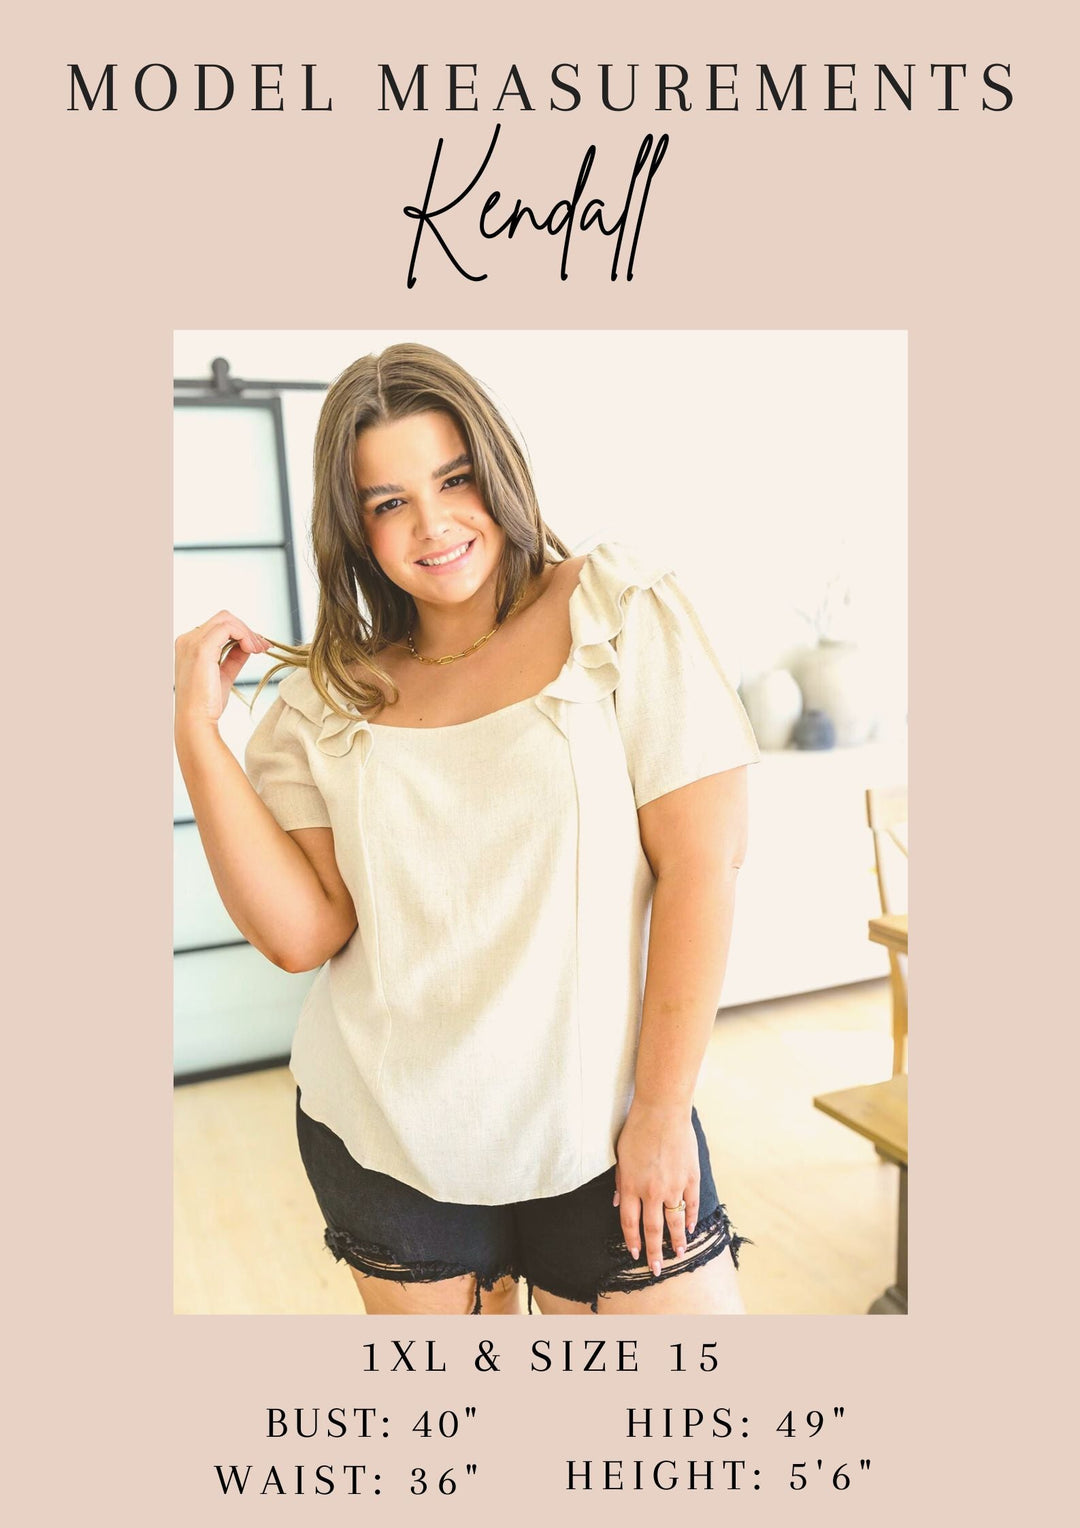 Pristine Puff Sleeve Top in White-Short Sleeve Tops-Krush Kandy, Women's Online Fashion Boutique Located in Phoenix, Arizona (Scottsdale Area)